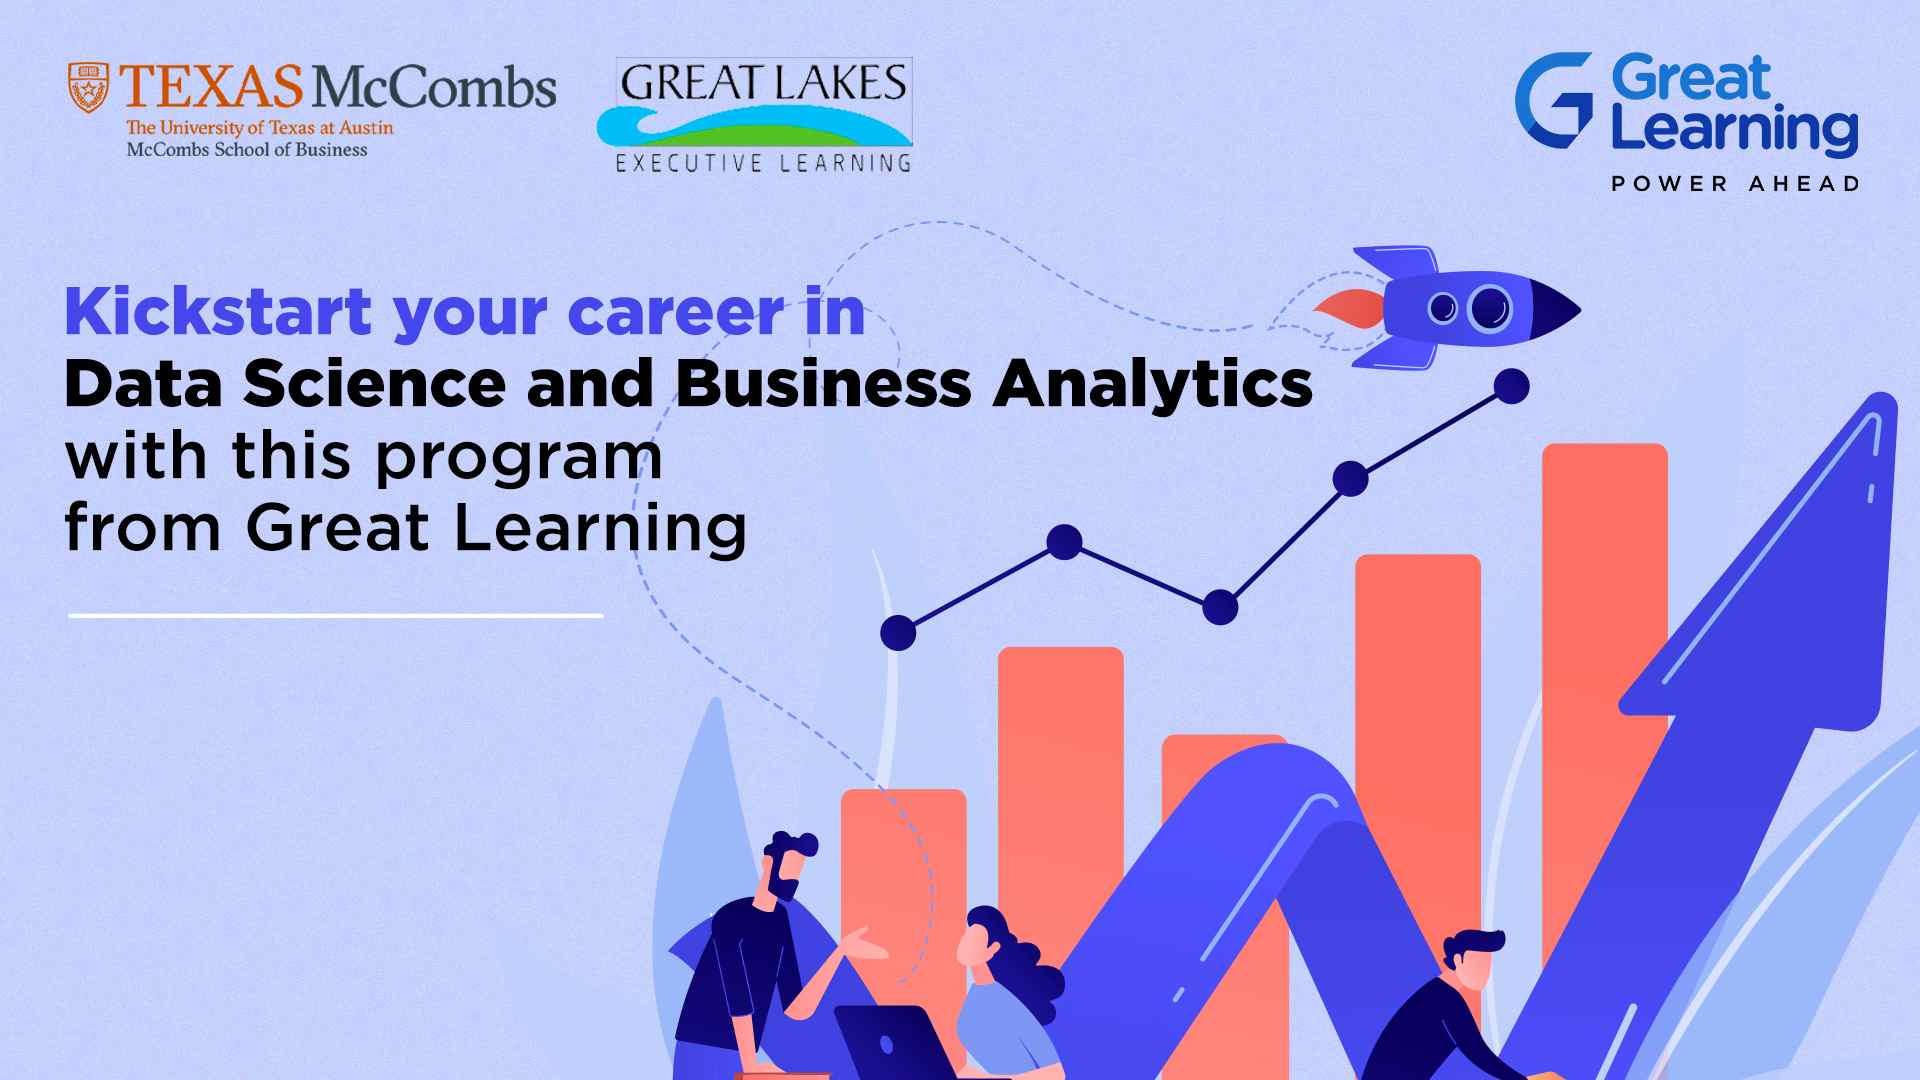 Kickstart your career in Data Science and Business Analytics with this program from Great Learning